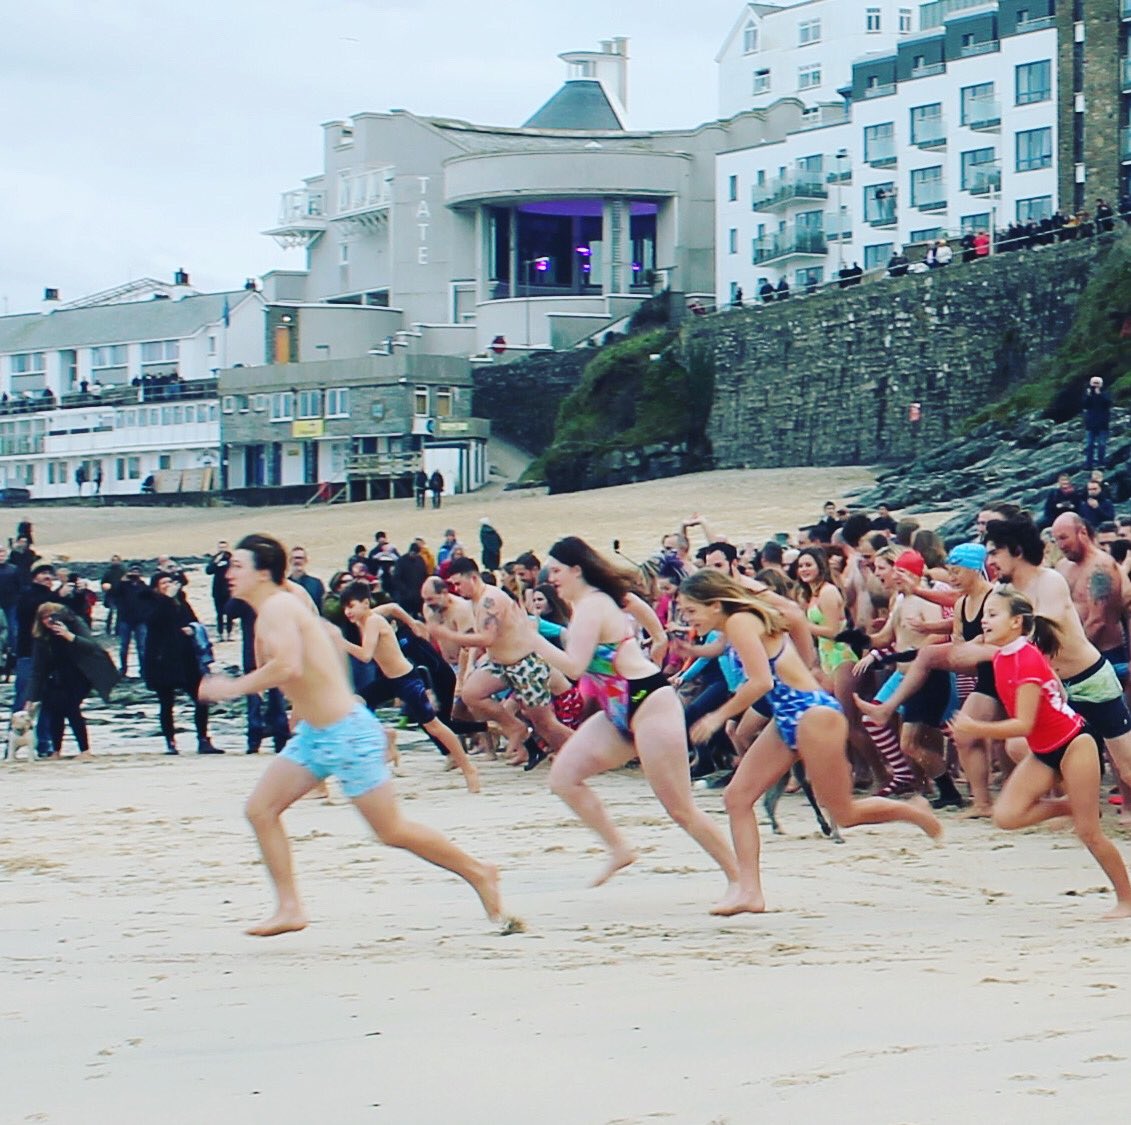 Fantastic turn out for the St Ives Surf Life Saving Clubs New Years Day Dip 2020. Cosies, wetsuit and great Fancy dress costumes this year. #sislsc #newyearsday2020 #seadip #stivescornwall  #porthmeor